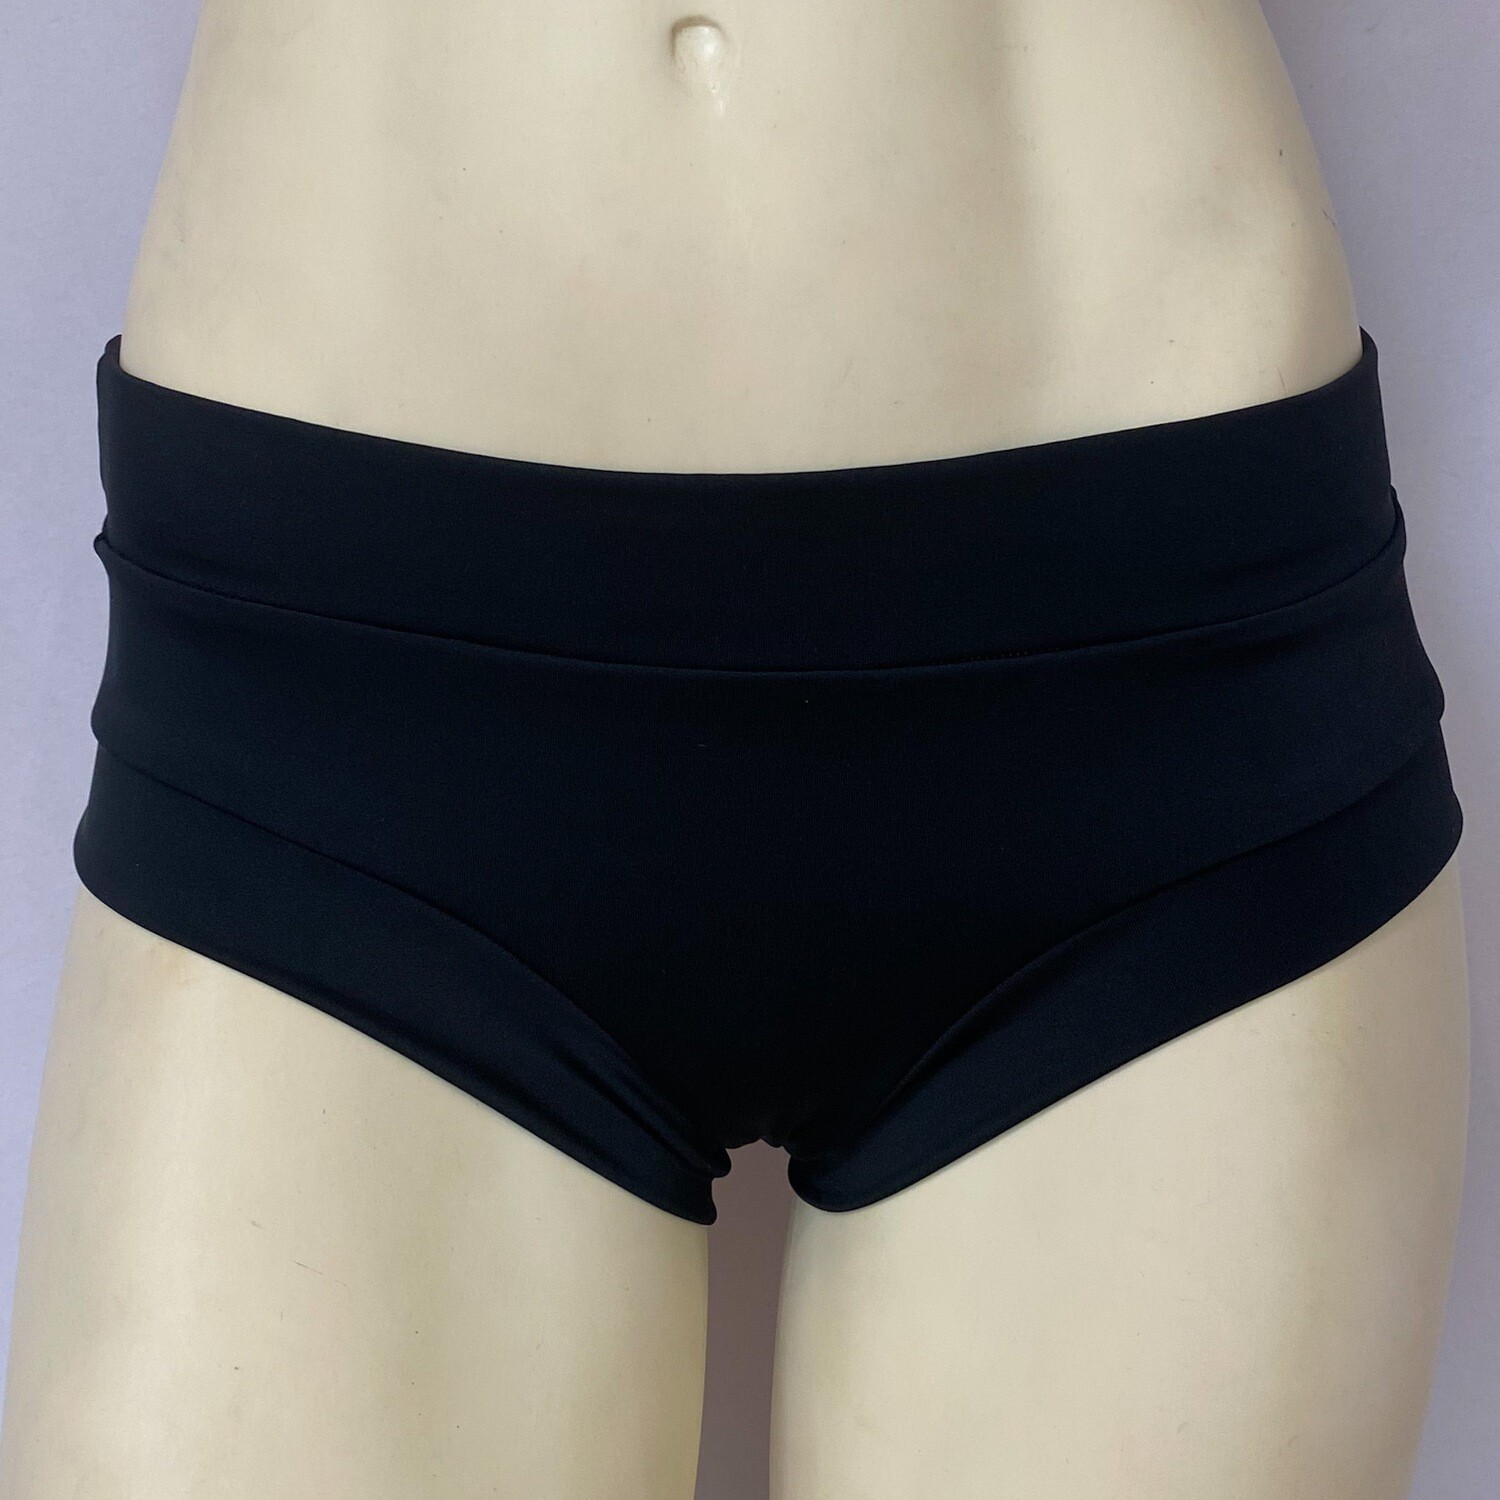 Stay-Put Pole Fit Shorts / Solids, Colour: Black, Size: X-Small